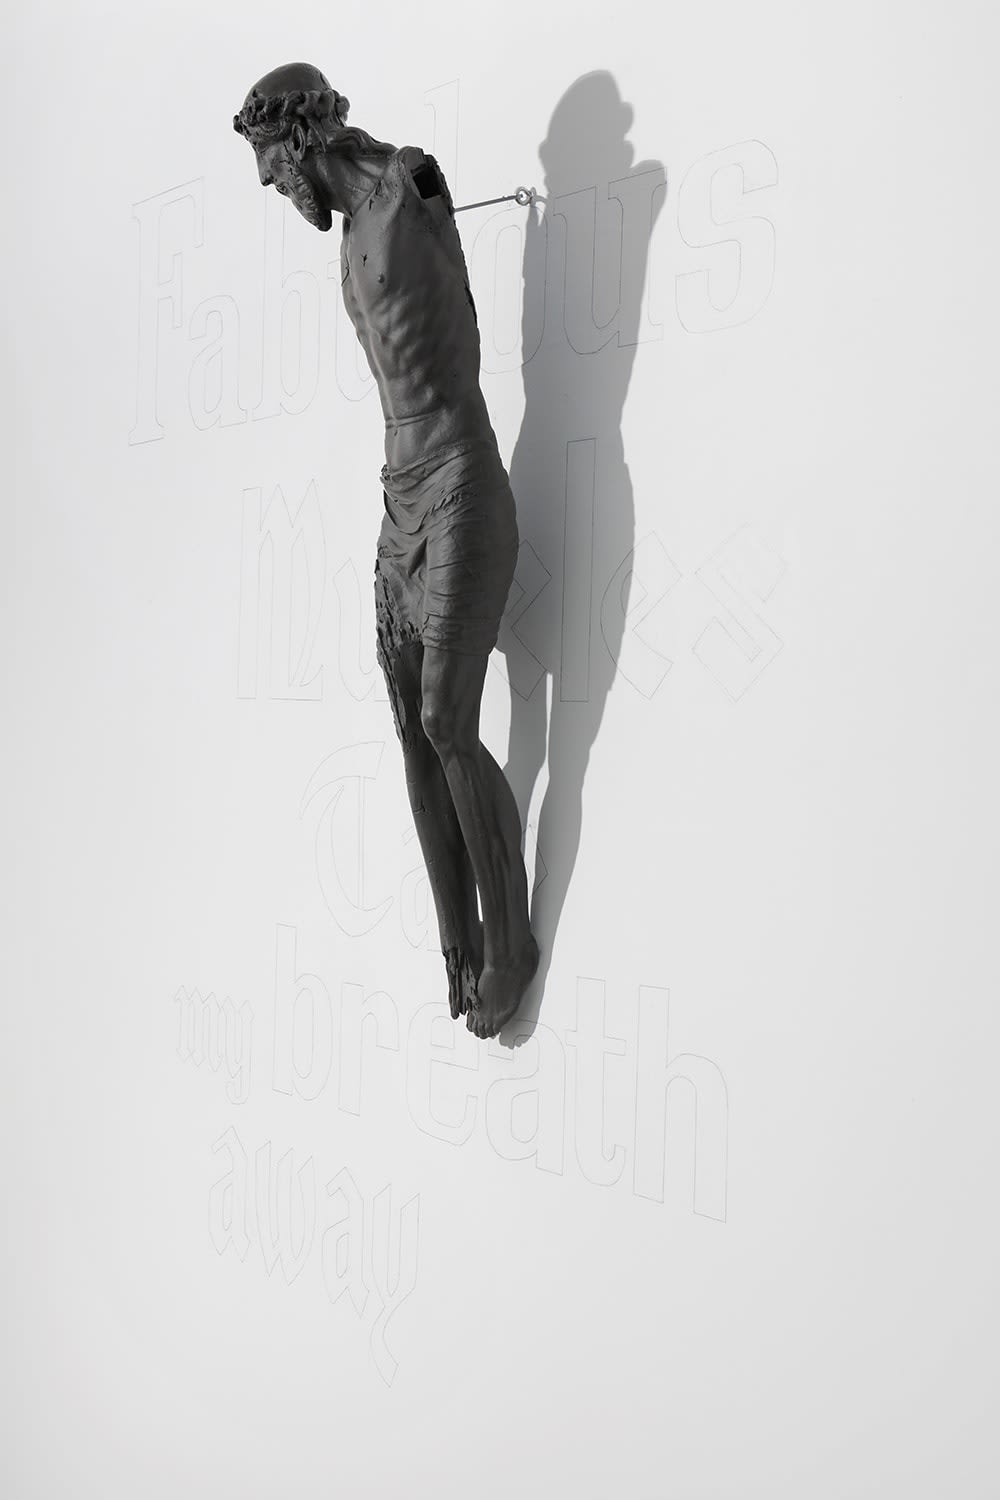 Installation view of a sculpture depicting Jesus crucified, suspended off a gallery wall featuring large faint text.